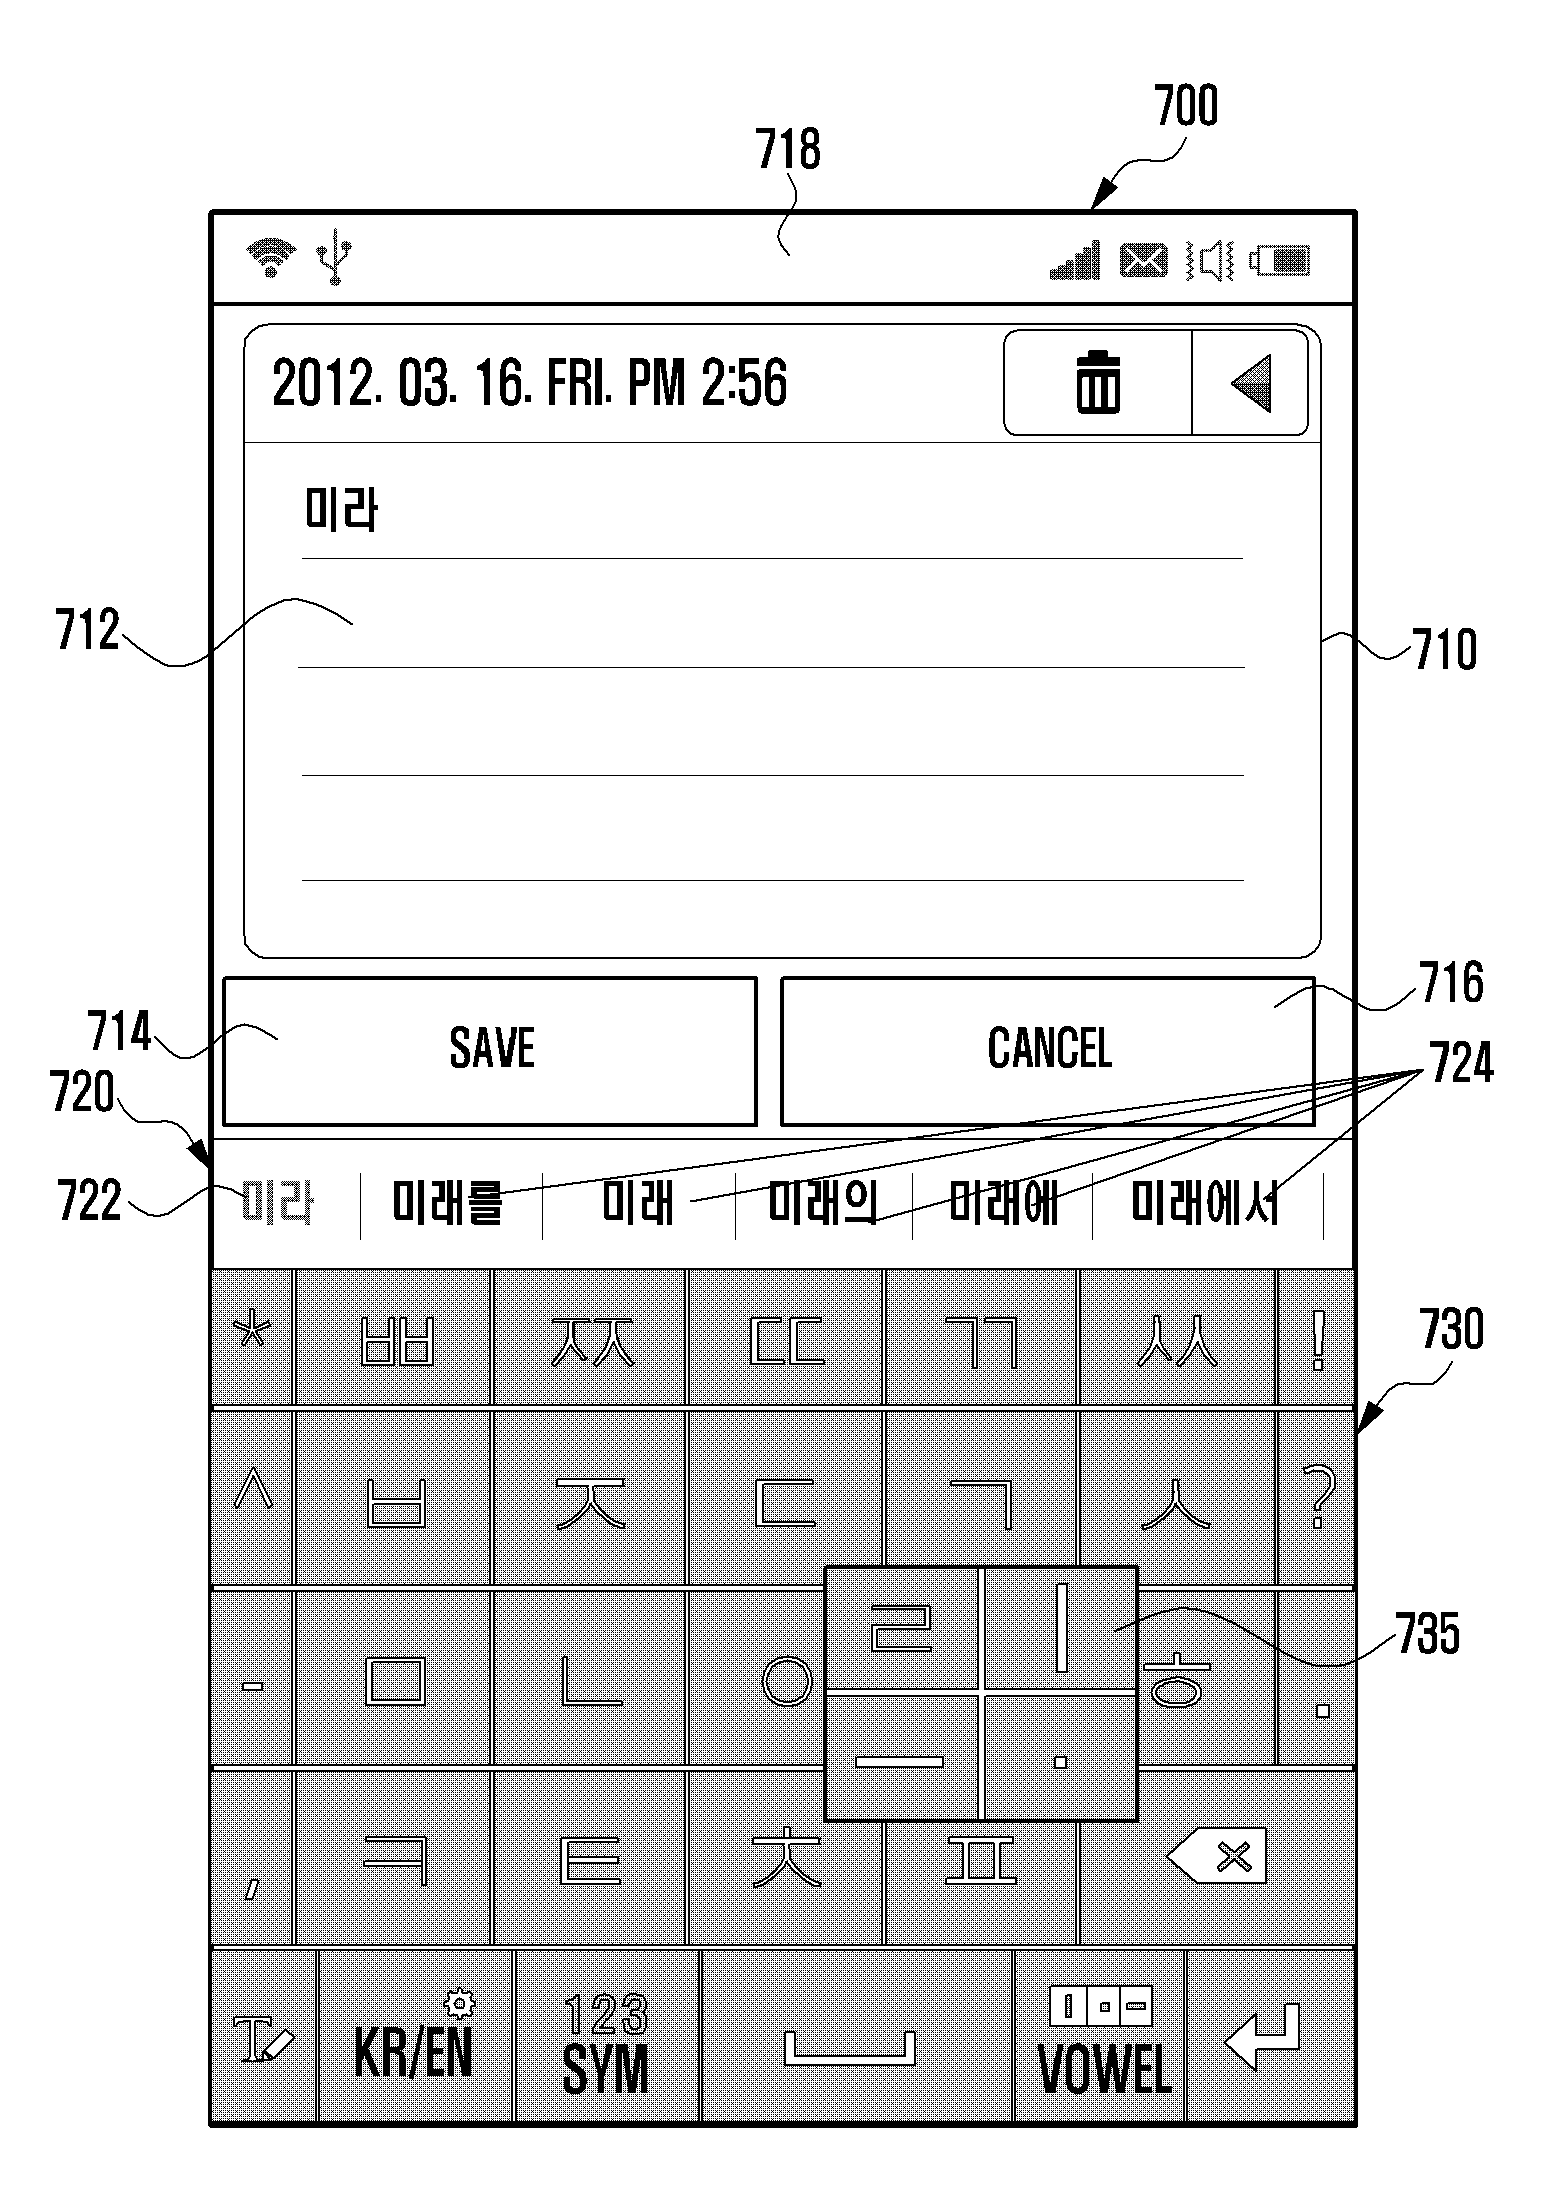 Character input method based on size adjustment of predicted input key and related electronic device